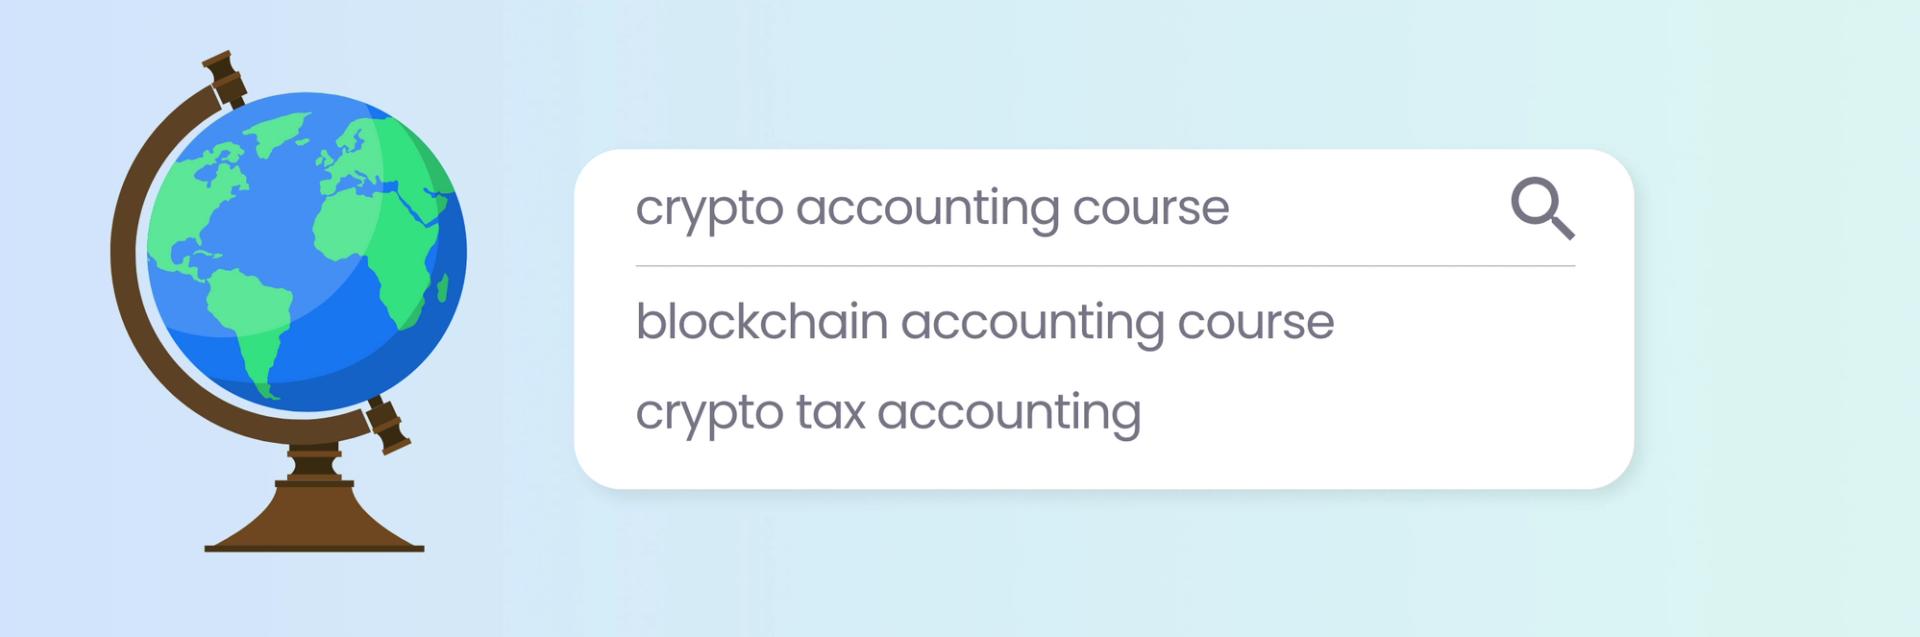 An illustration showing a search engine search for crypto accounting course, with blockchain accounting course and crypto tax accounting in the suggested search dropdown.